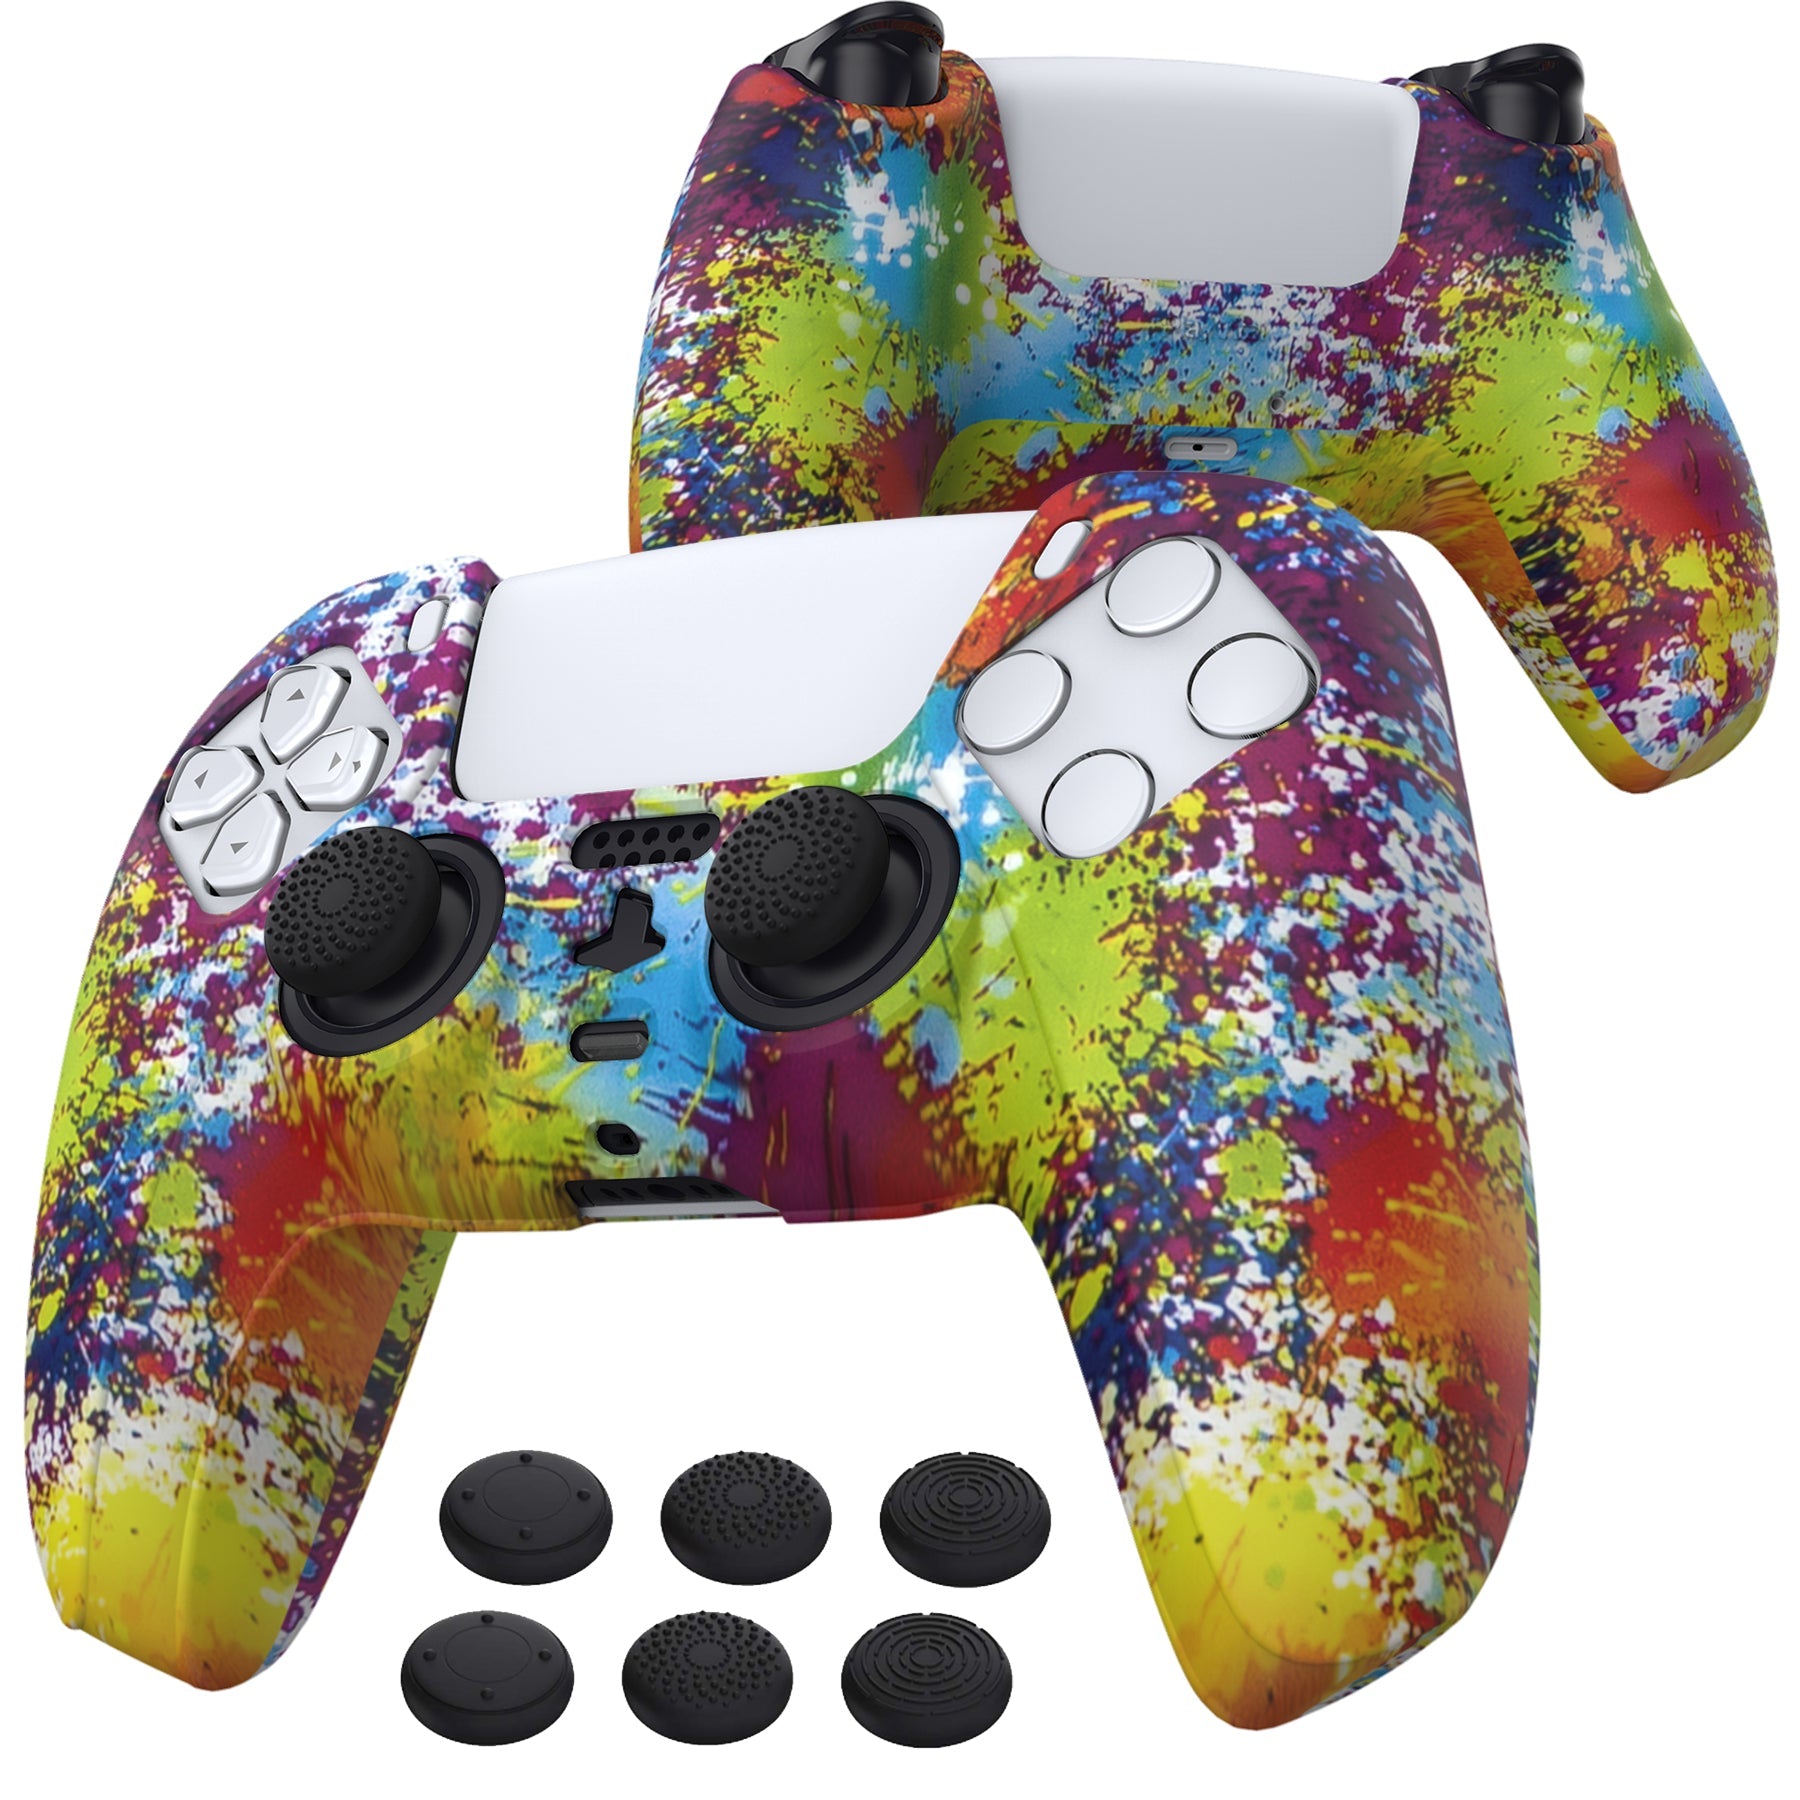 PlayVital Water Transfer Printing Colorful Splash Patterned Anti-Slip Silicone Cover Skin Soft Rubber Case Protector for PS5 Controller with 6 Thumb Grip Caps - KOPF024 PlayVital